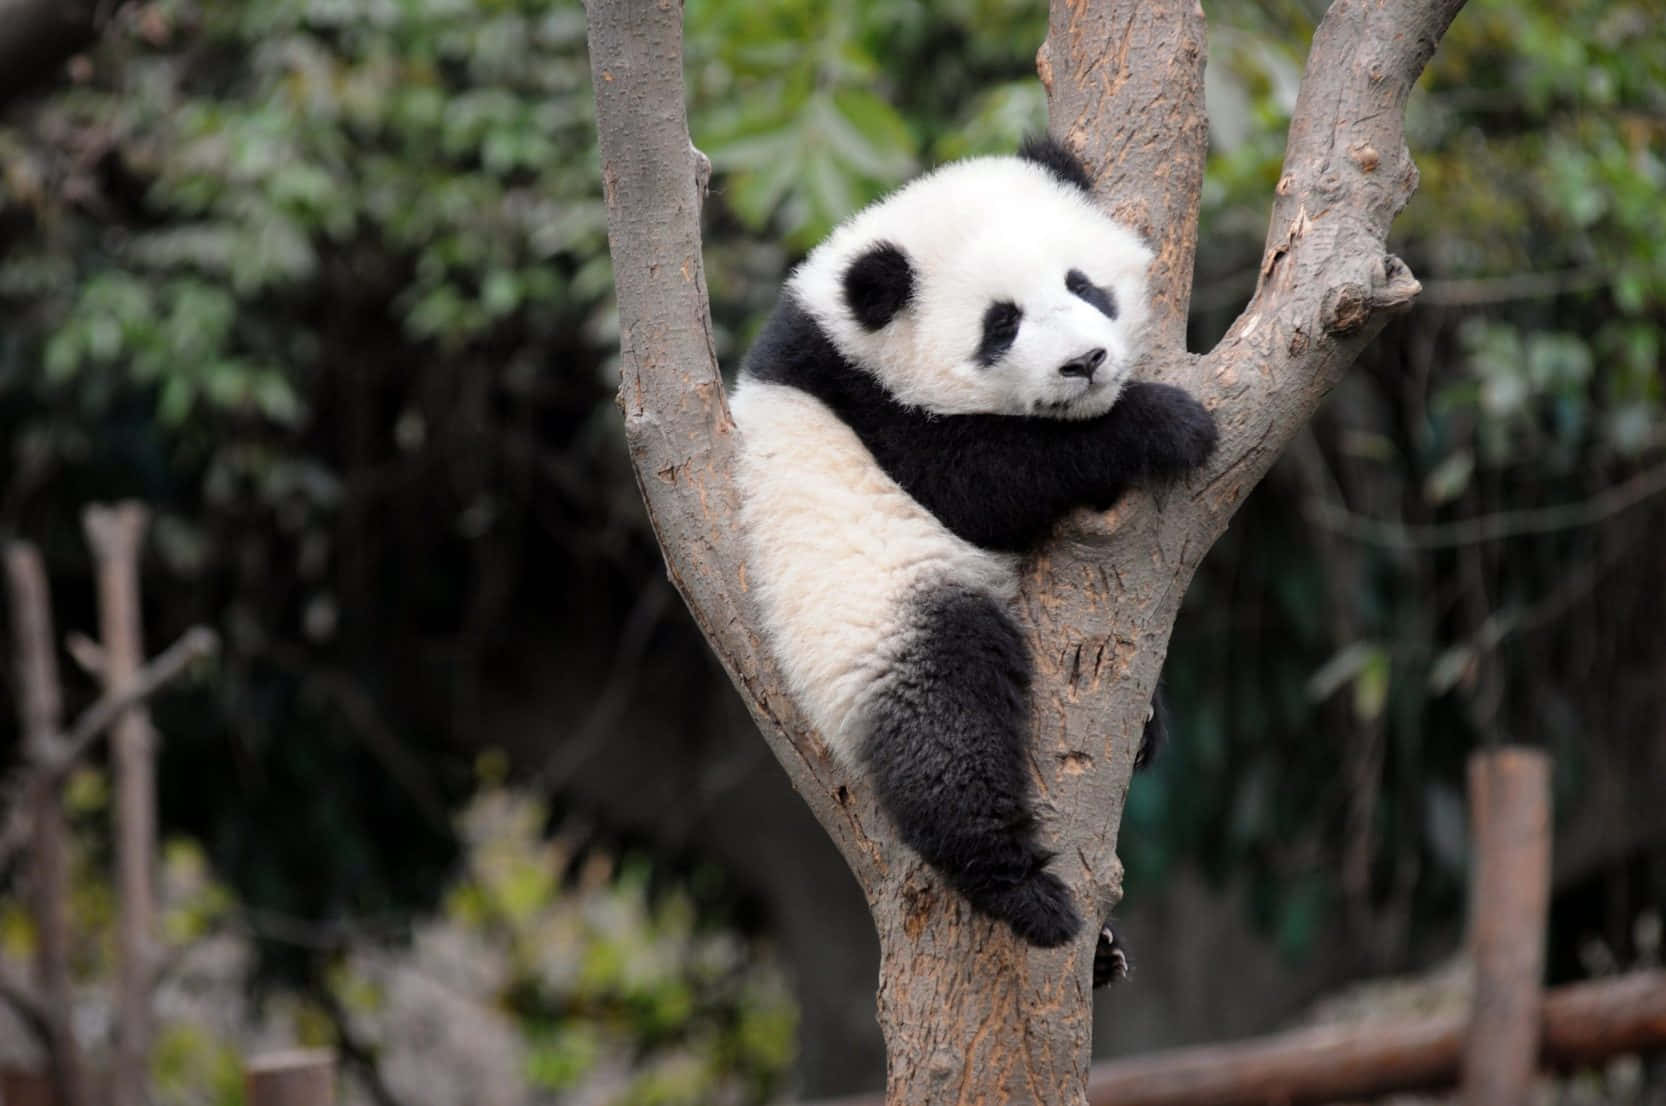 Share the love with this cute panda!